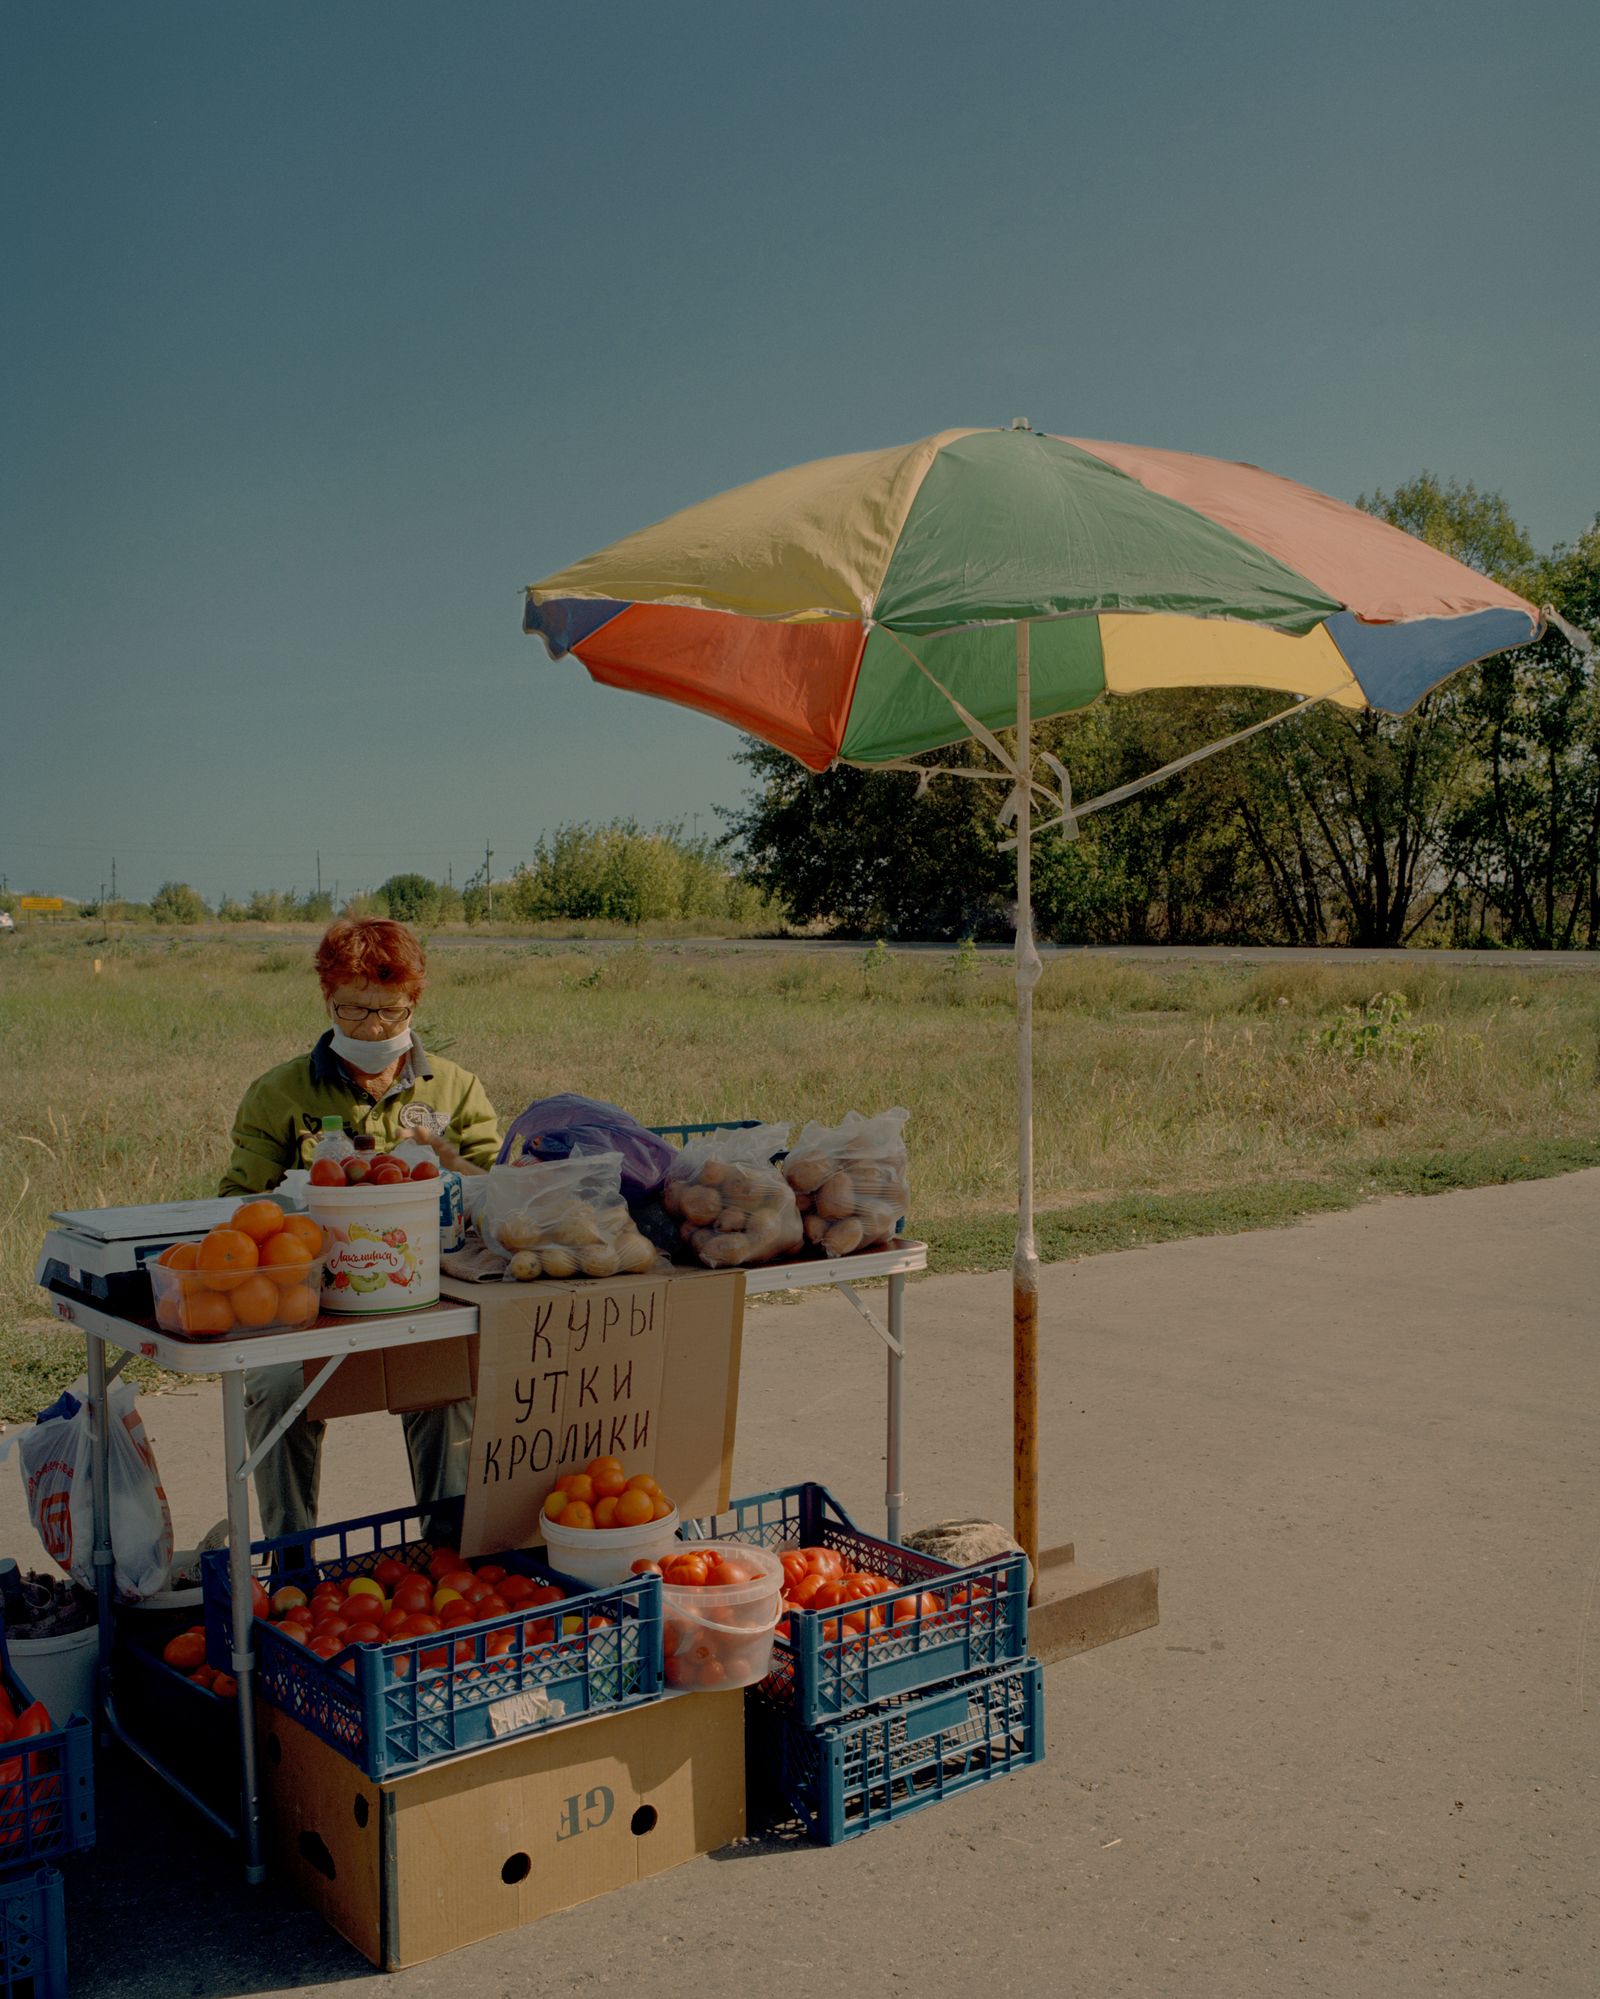 © Varvara Gorbunova - Image from the Untold Stories of Russian Summer photography project